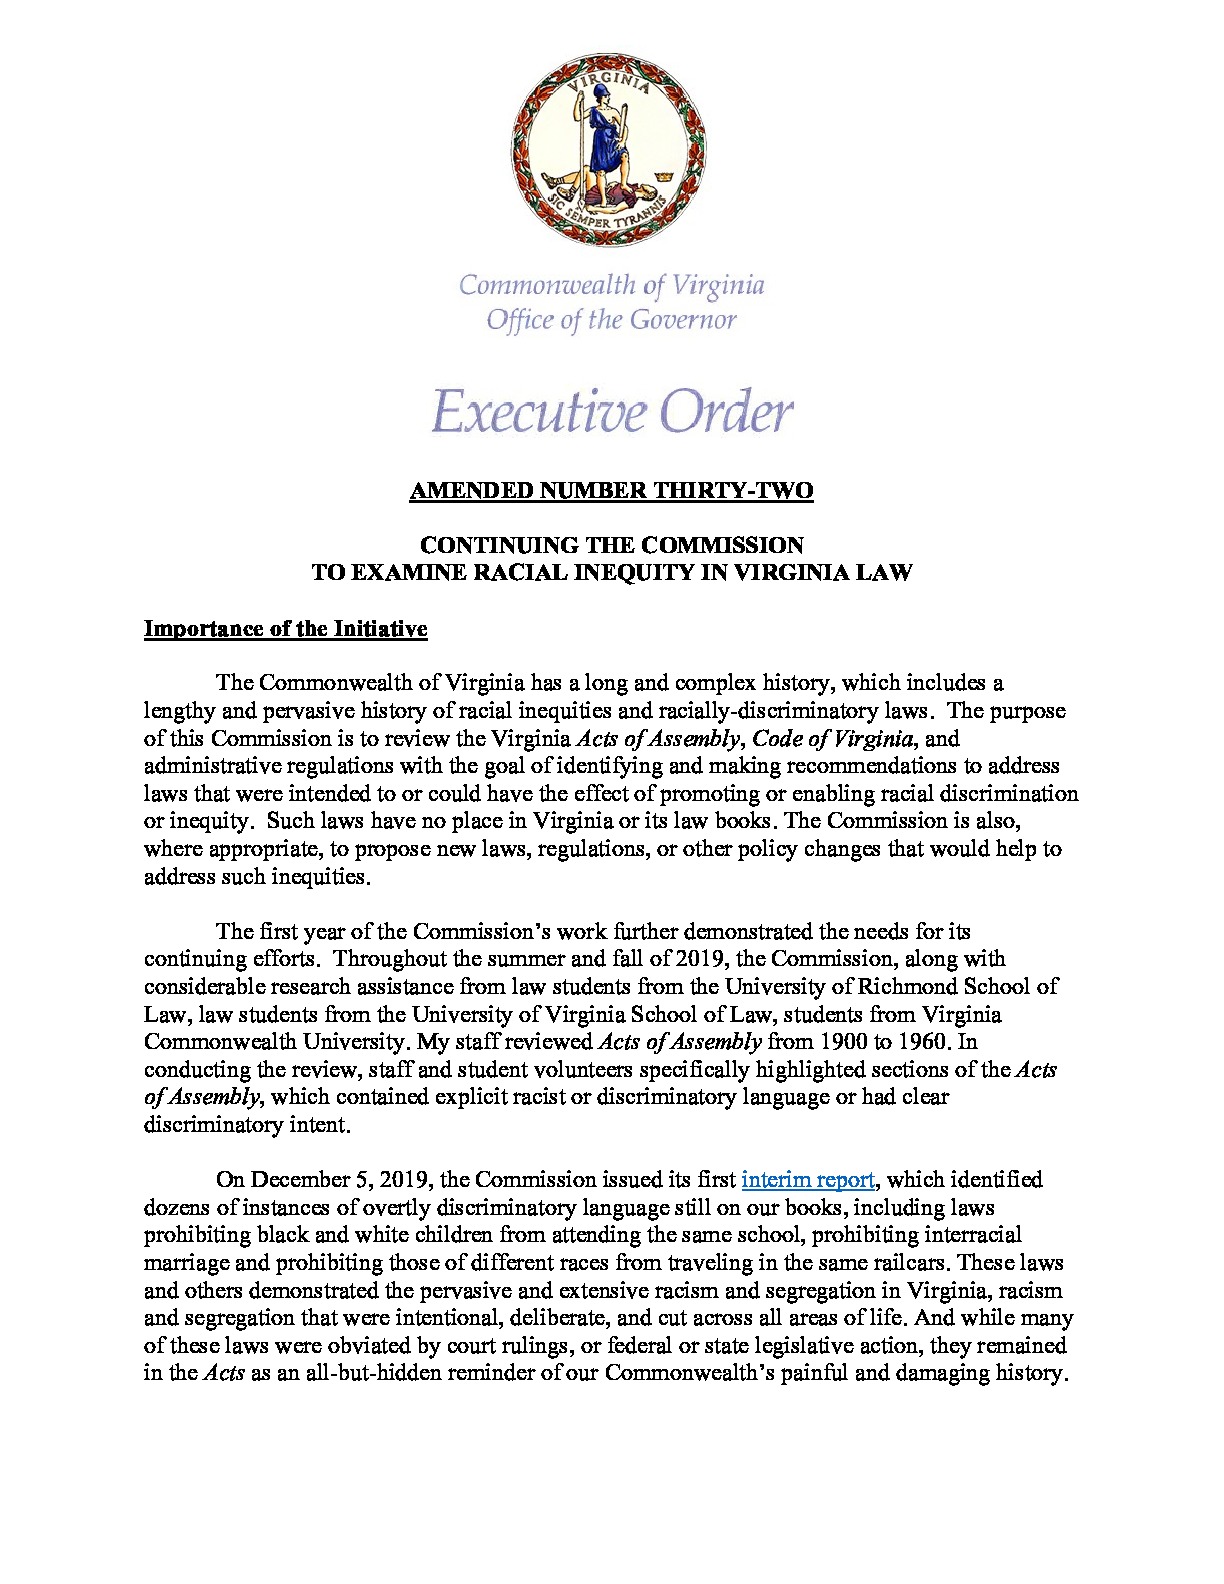 EO-32-AMENDED---Establishment-of-the-Commission-to-Examine-Racial-Inequity-in-Virginia-Law.pdf